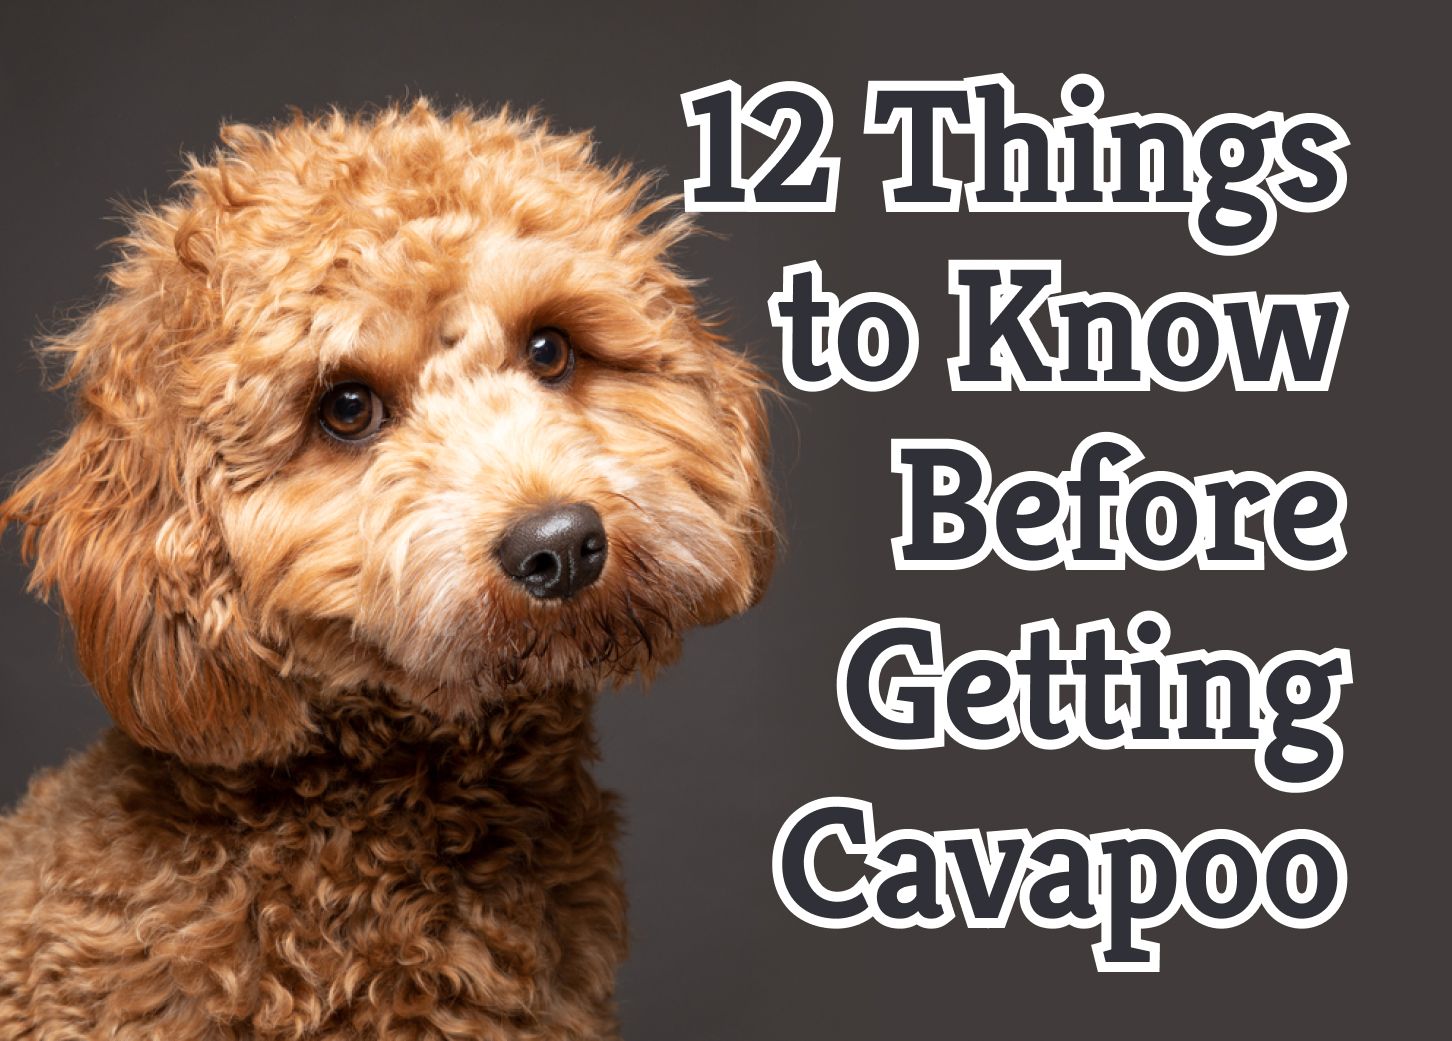 Cavapoo Bible And Cavapoos Your Perfect Cavapoo Guide Cavapoos